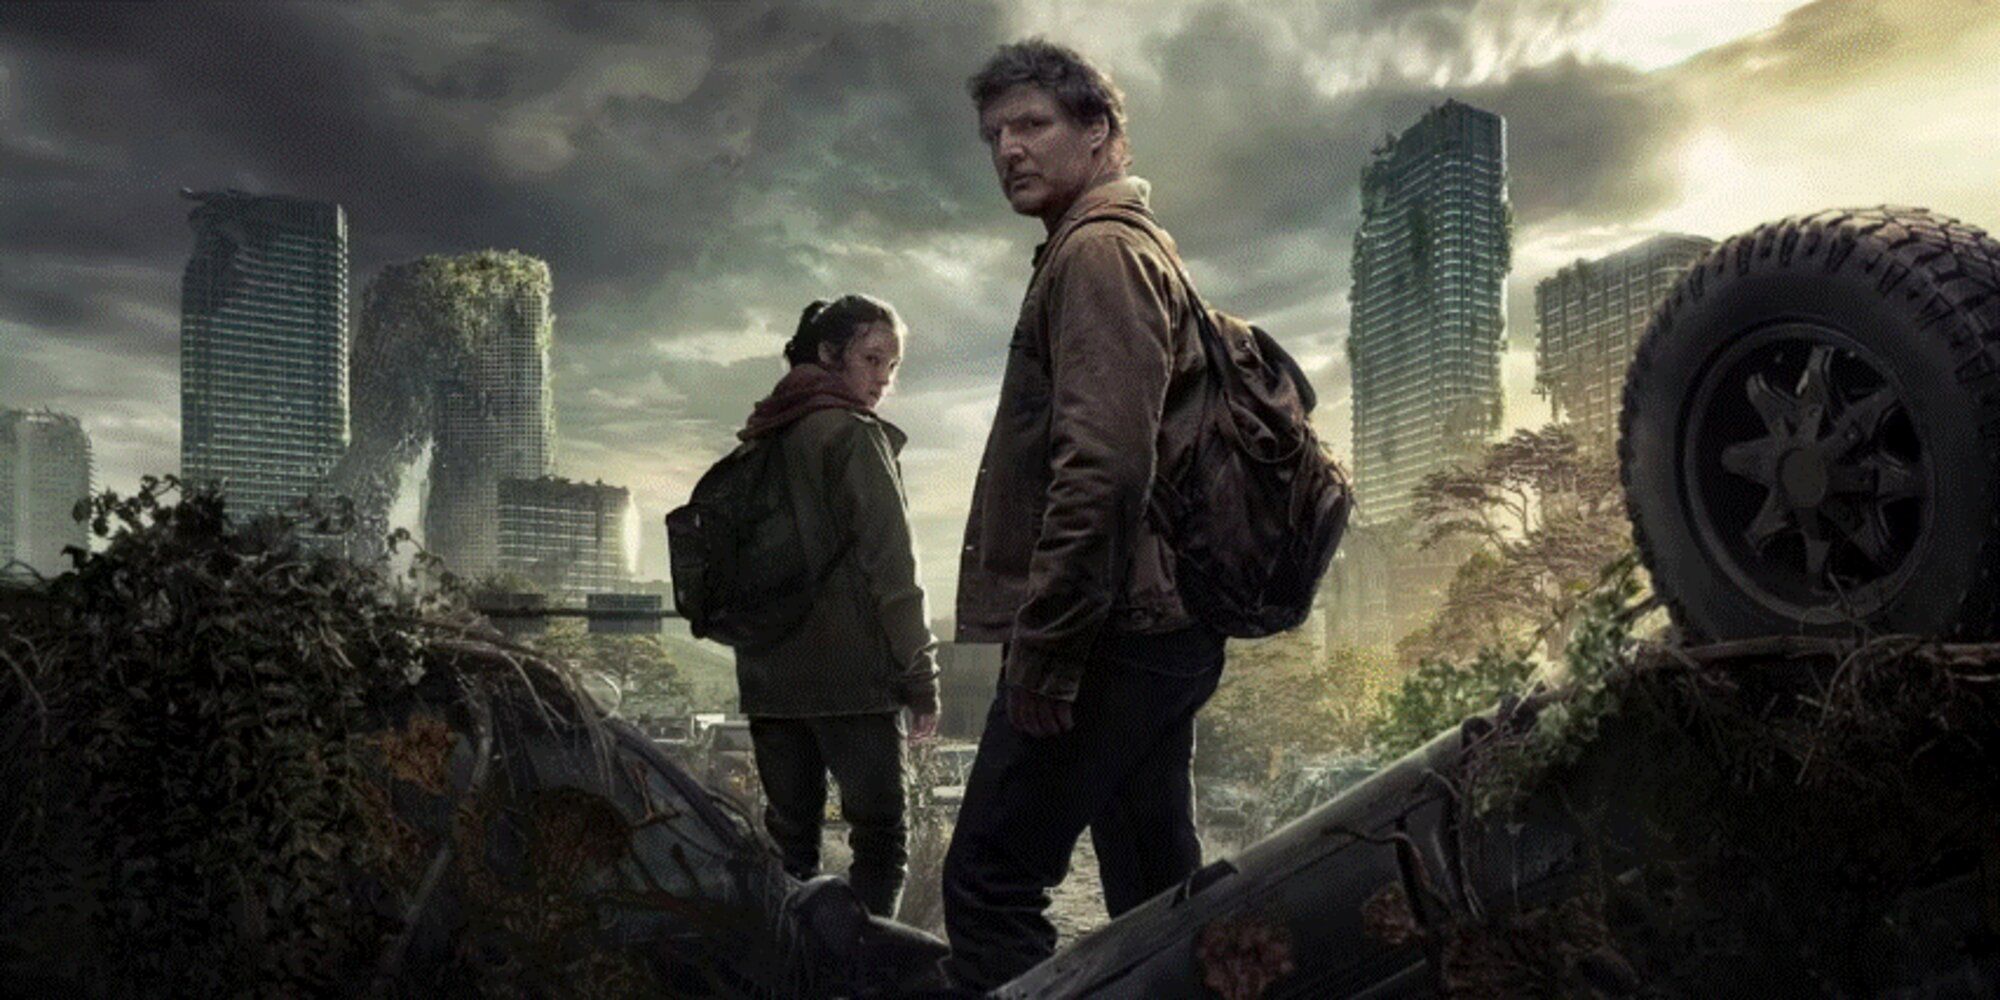 The Last Of Us Show Pedro Pascal and Bella Ramsey as Joel and Ellie.